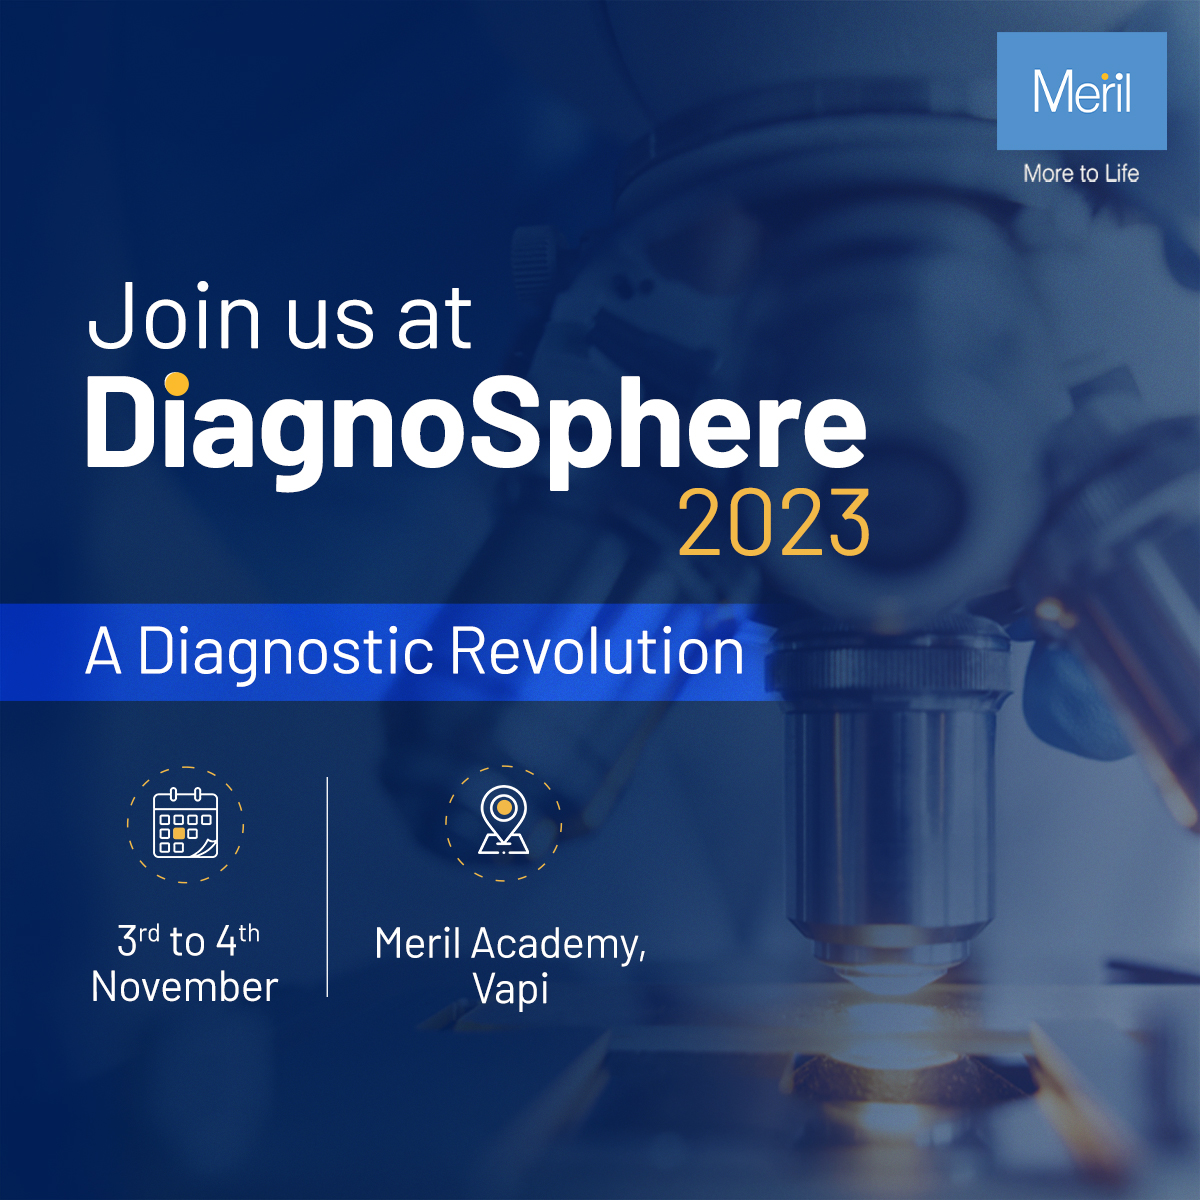 Join us at for DiagnoSphere 2023 at Meril Academy!